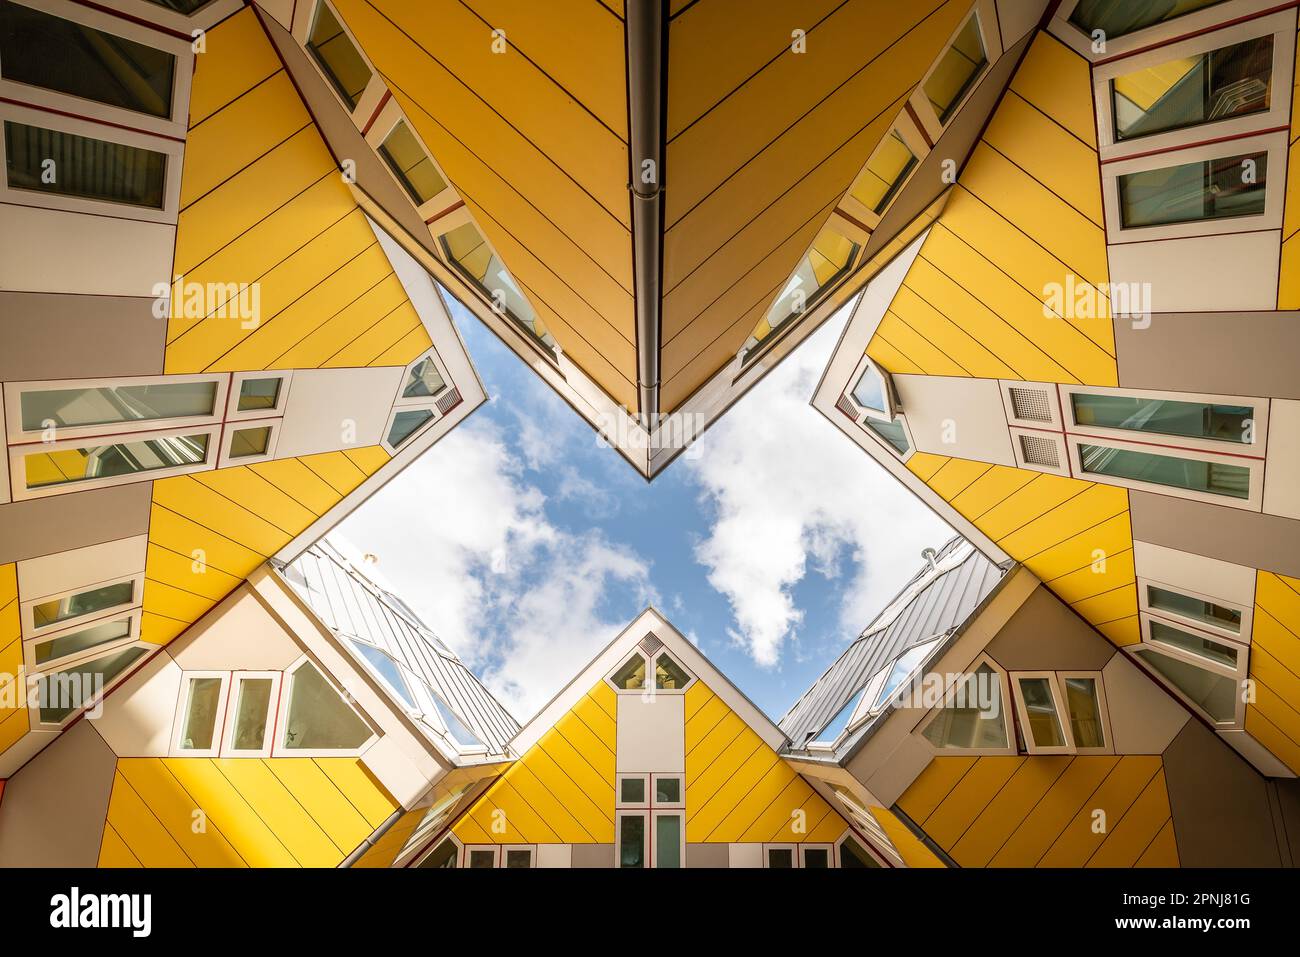 The Cube houses is famous attractions in Rotterdam due they shapes. There are offices, flats, and ahostel too. Cube houses or Kubuswoningen in Dutch a Stock Photo